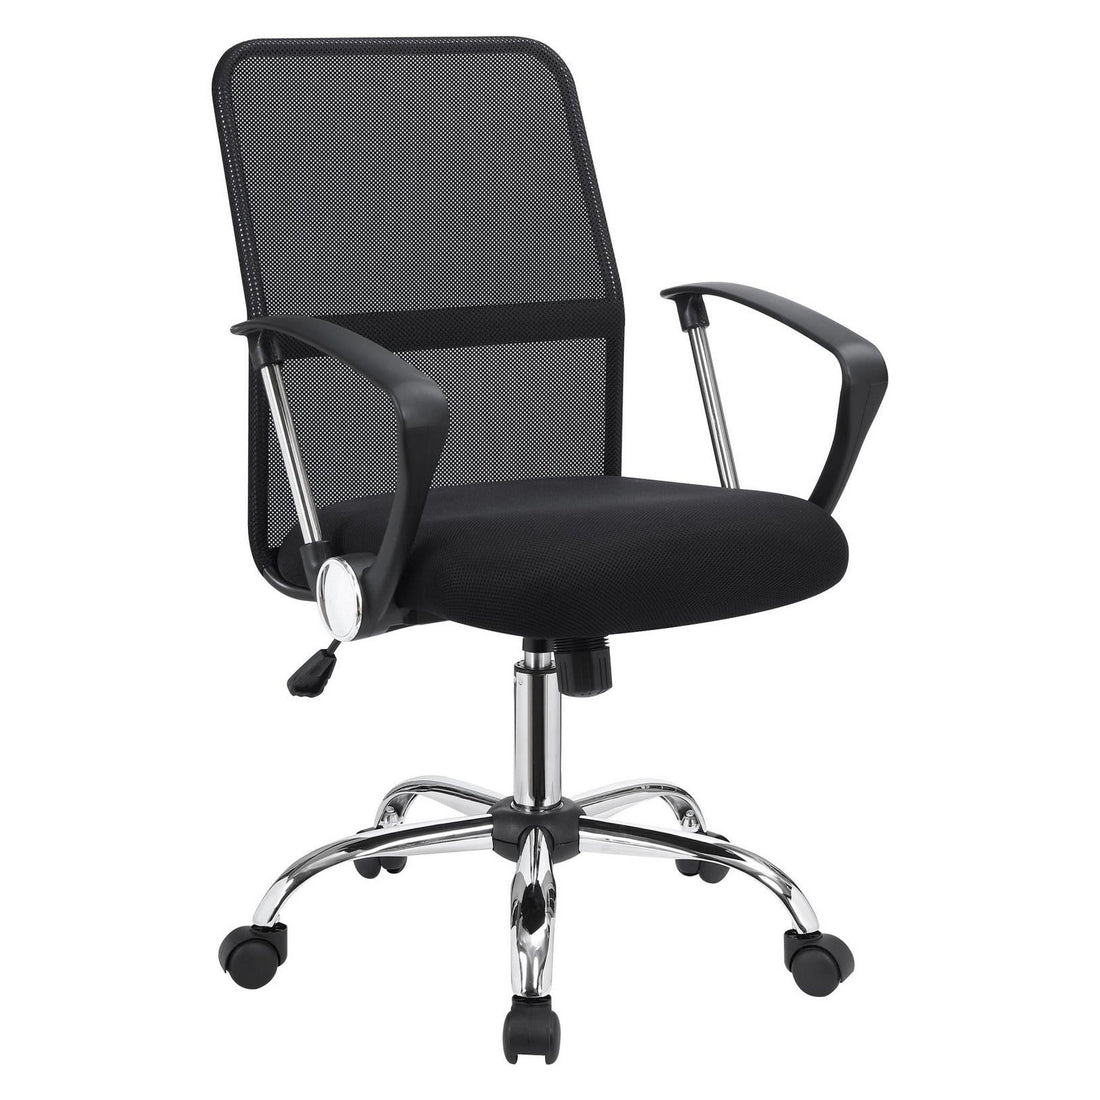 Gerta Office Chair with Mesh Backrest Black and Chrome 801319